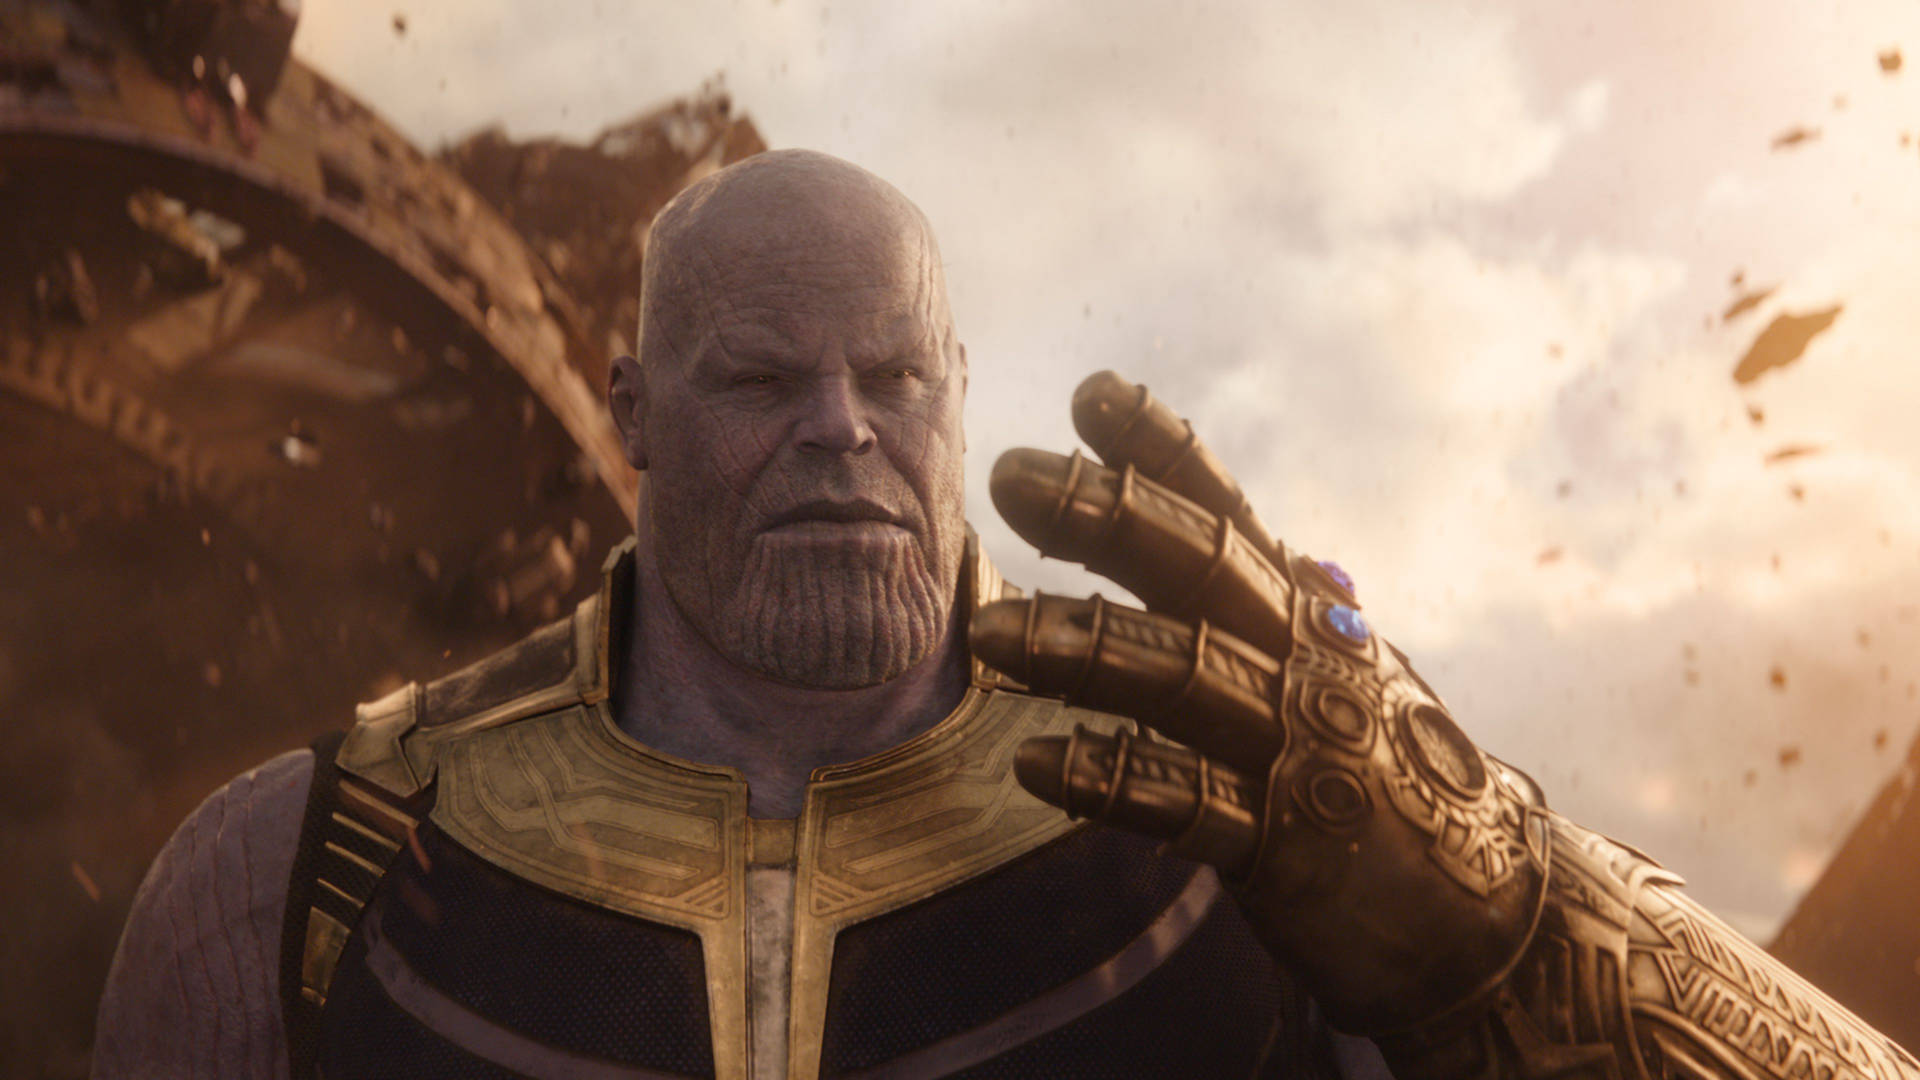 The Mad Titan Thanos Wielding the Infinity Gauntlet Wallpaper